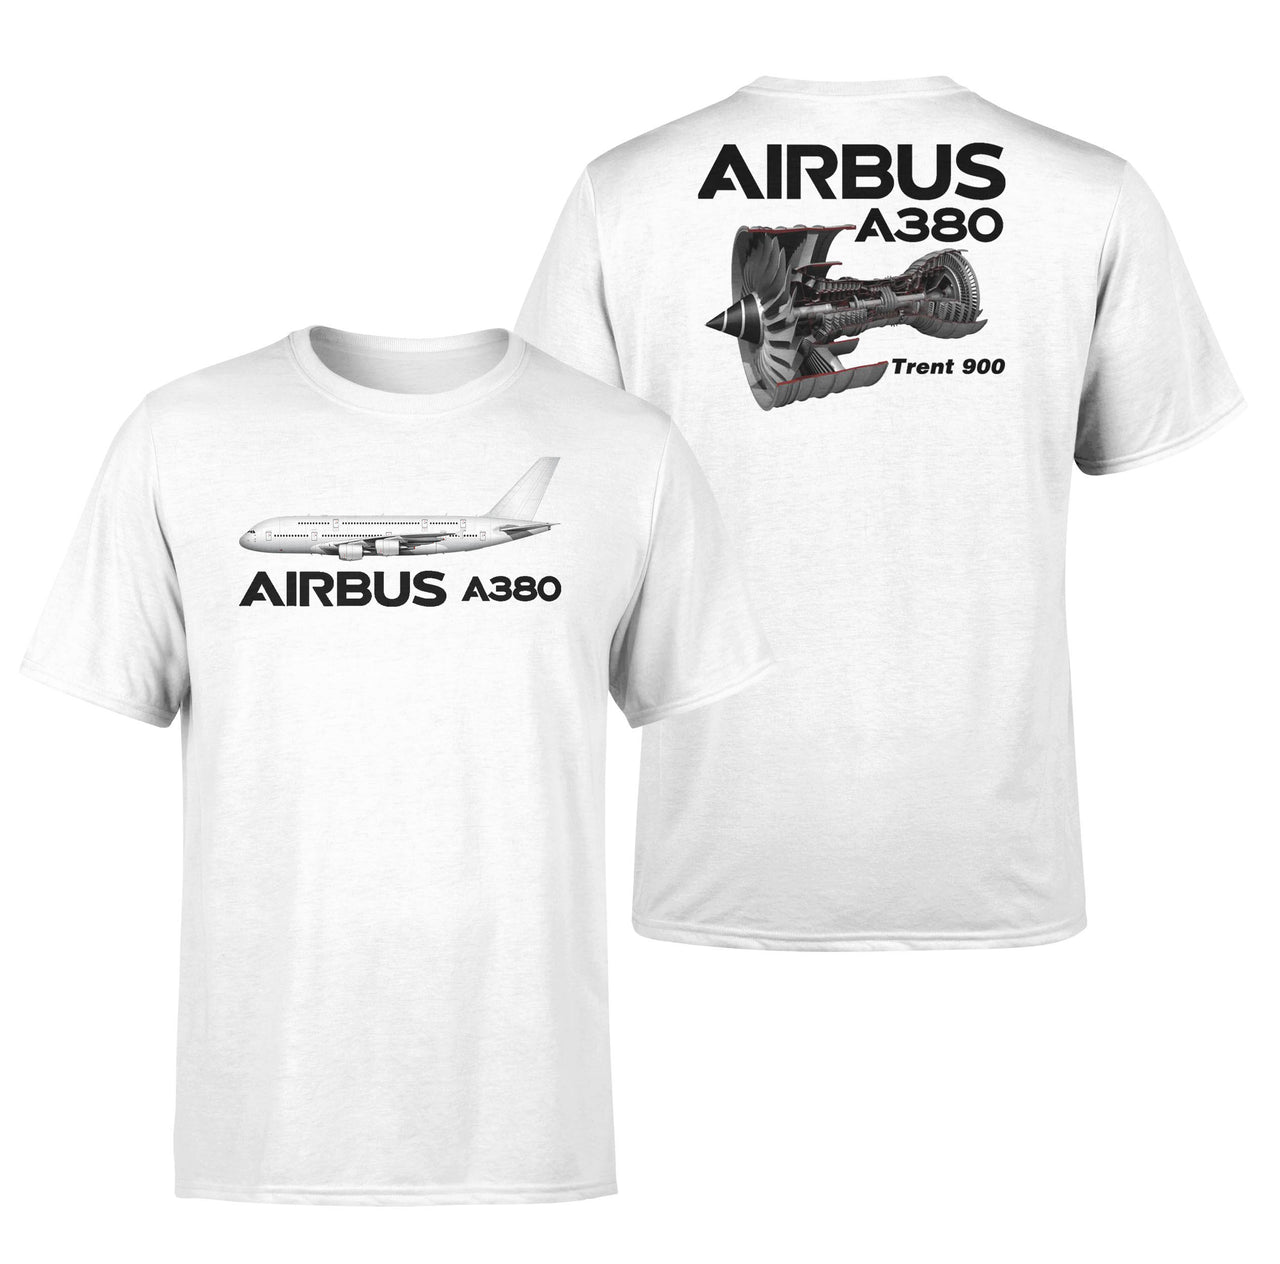 Airbus A380 & Trent 900 Engine Designed Double-Side T-Shirts